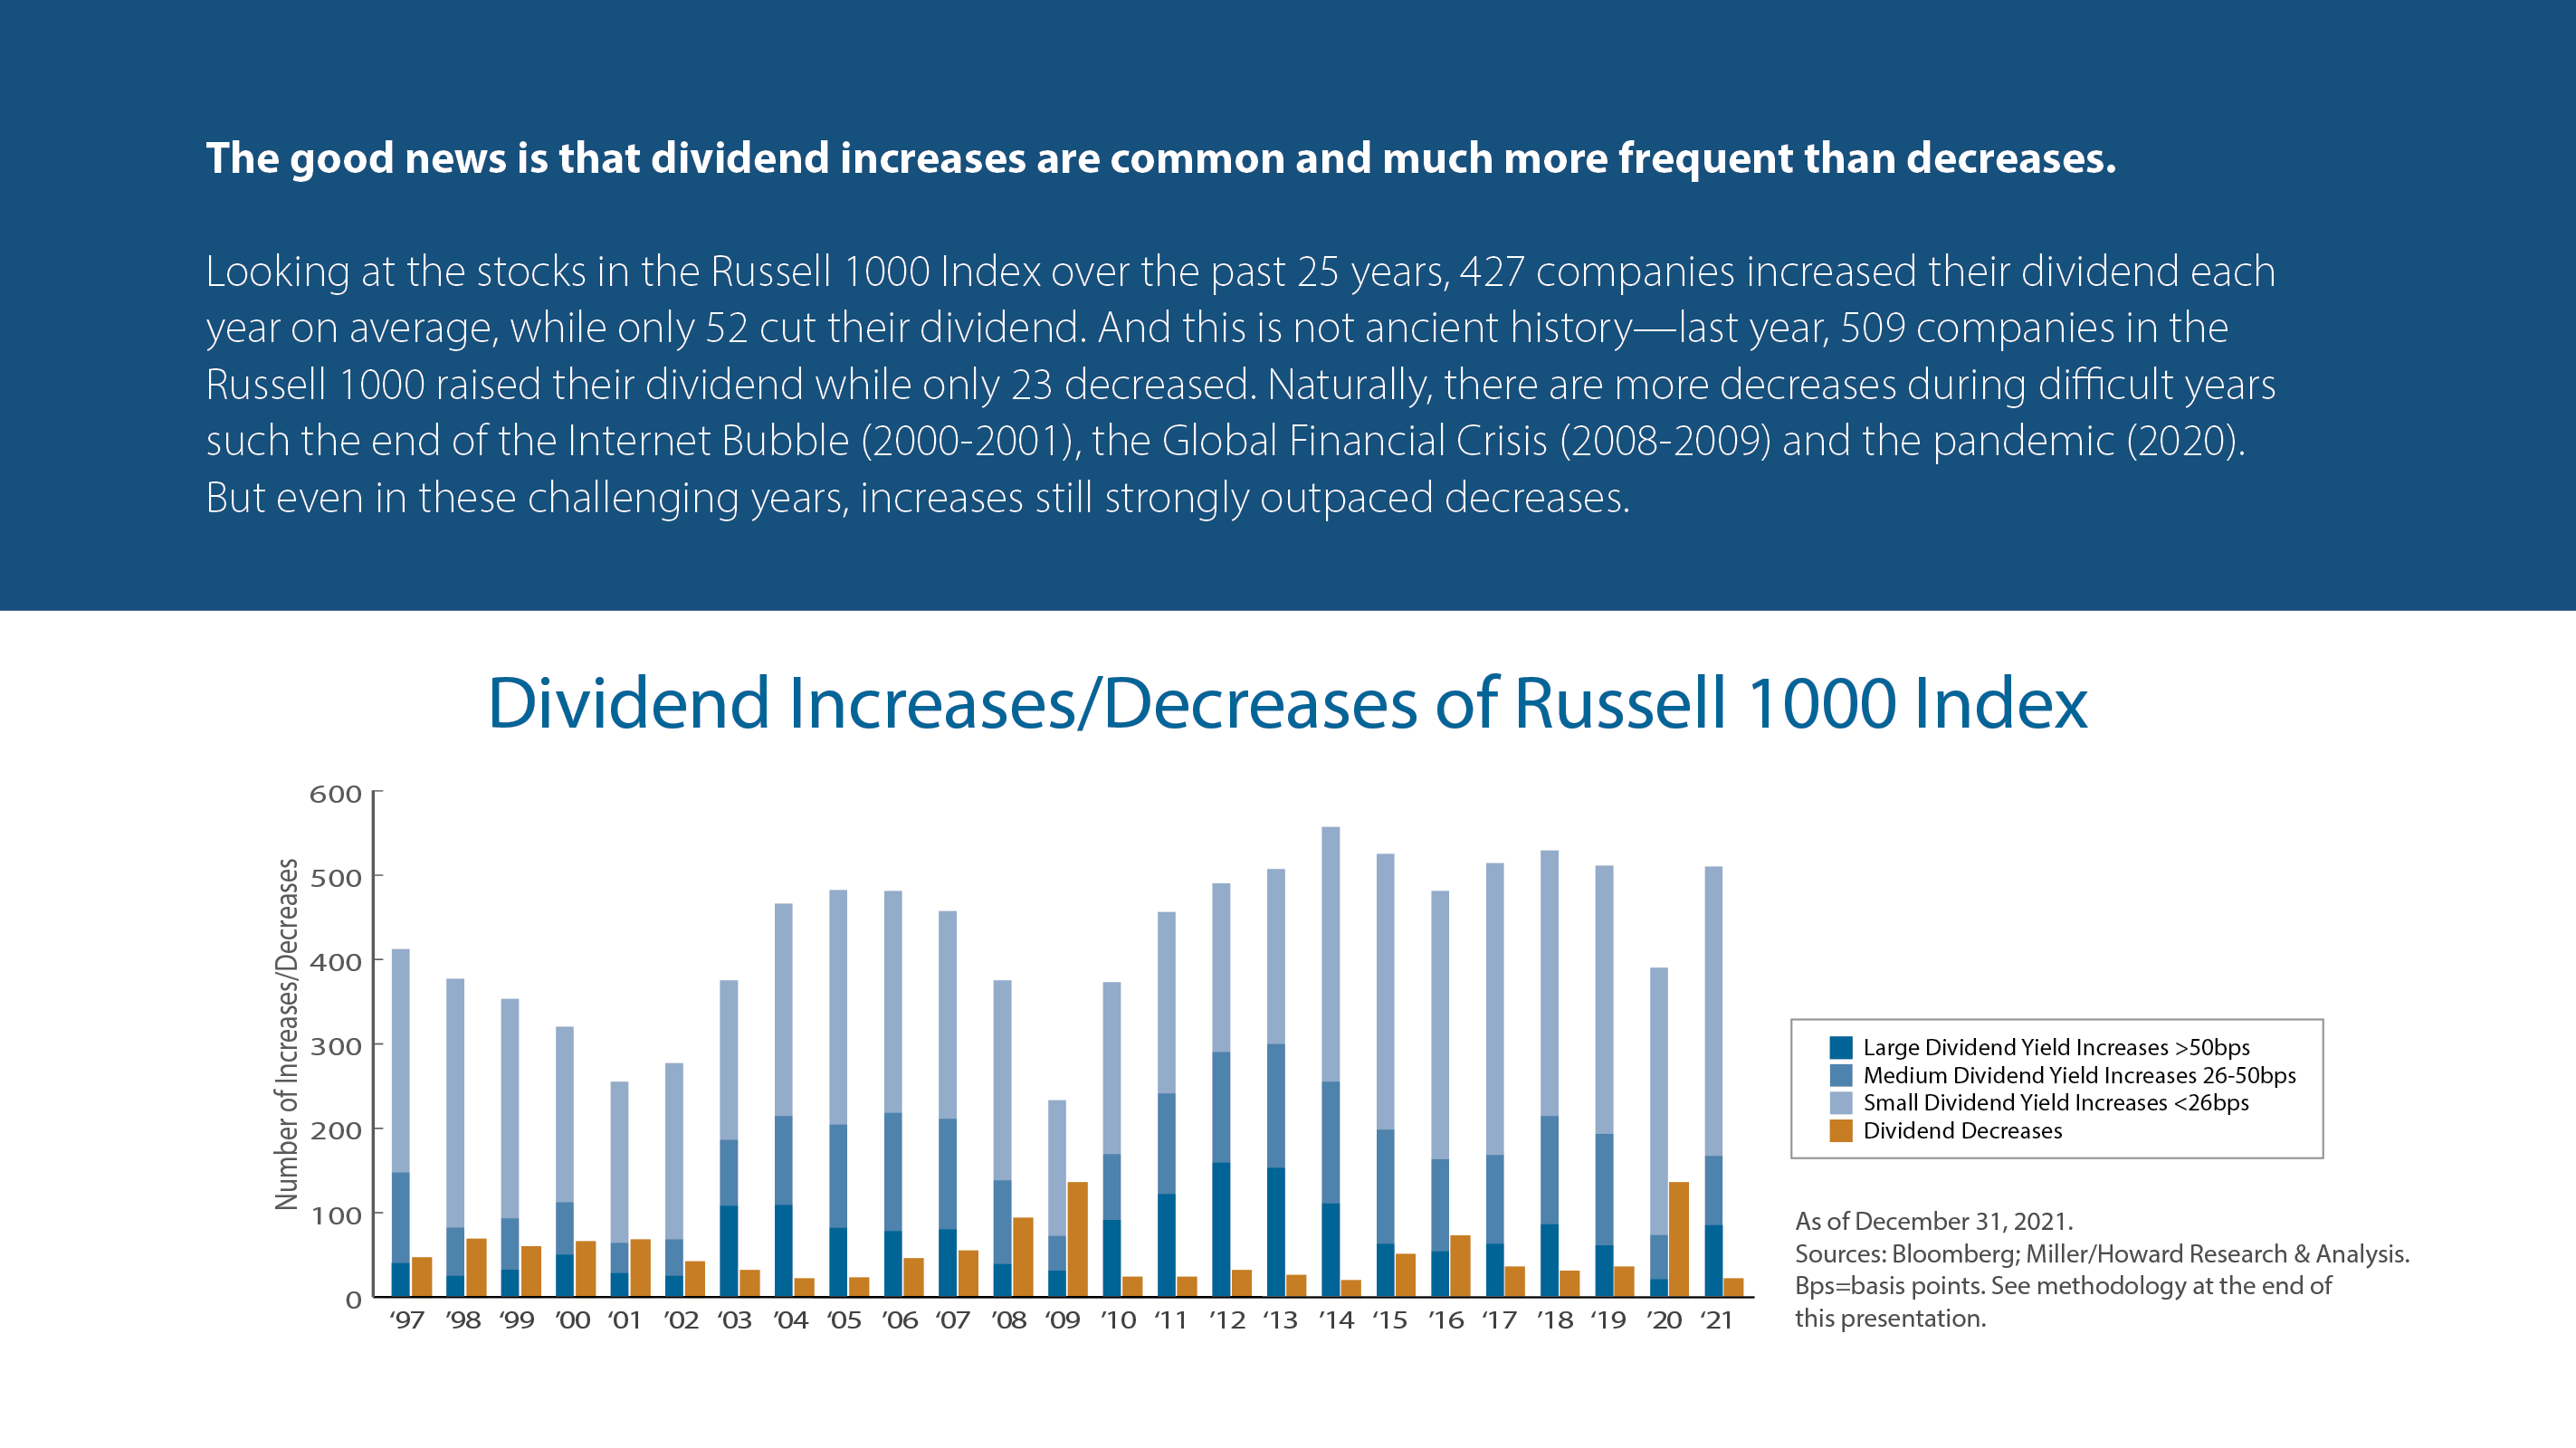 Dividend Increases/Decreases of Russell 1000 Index